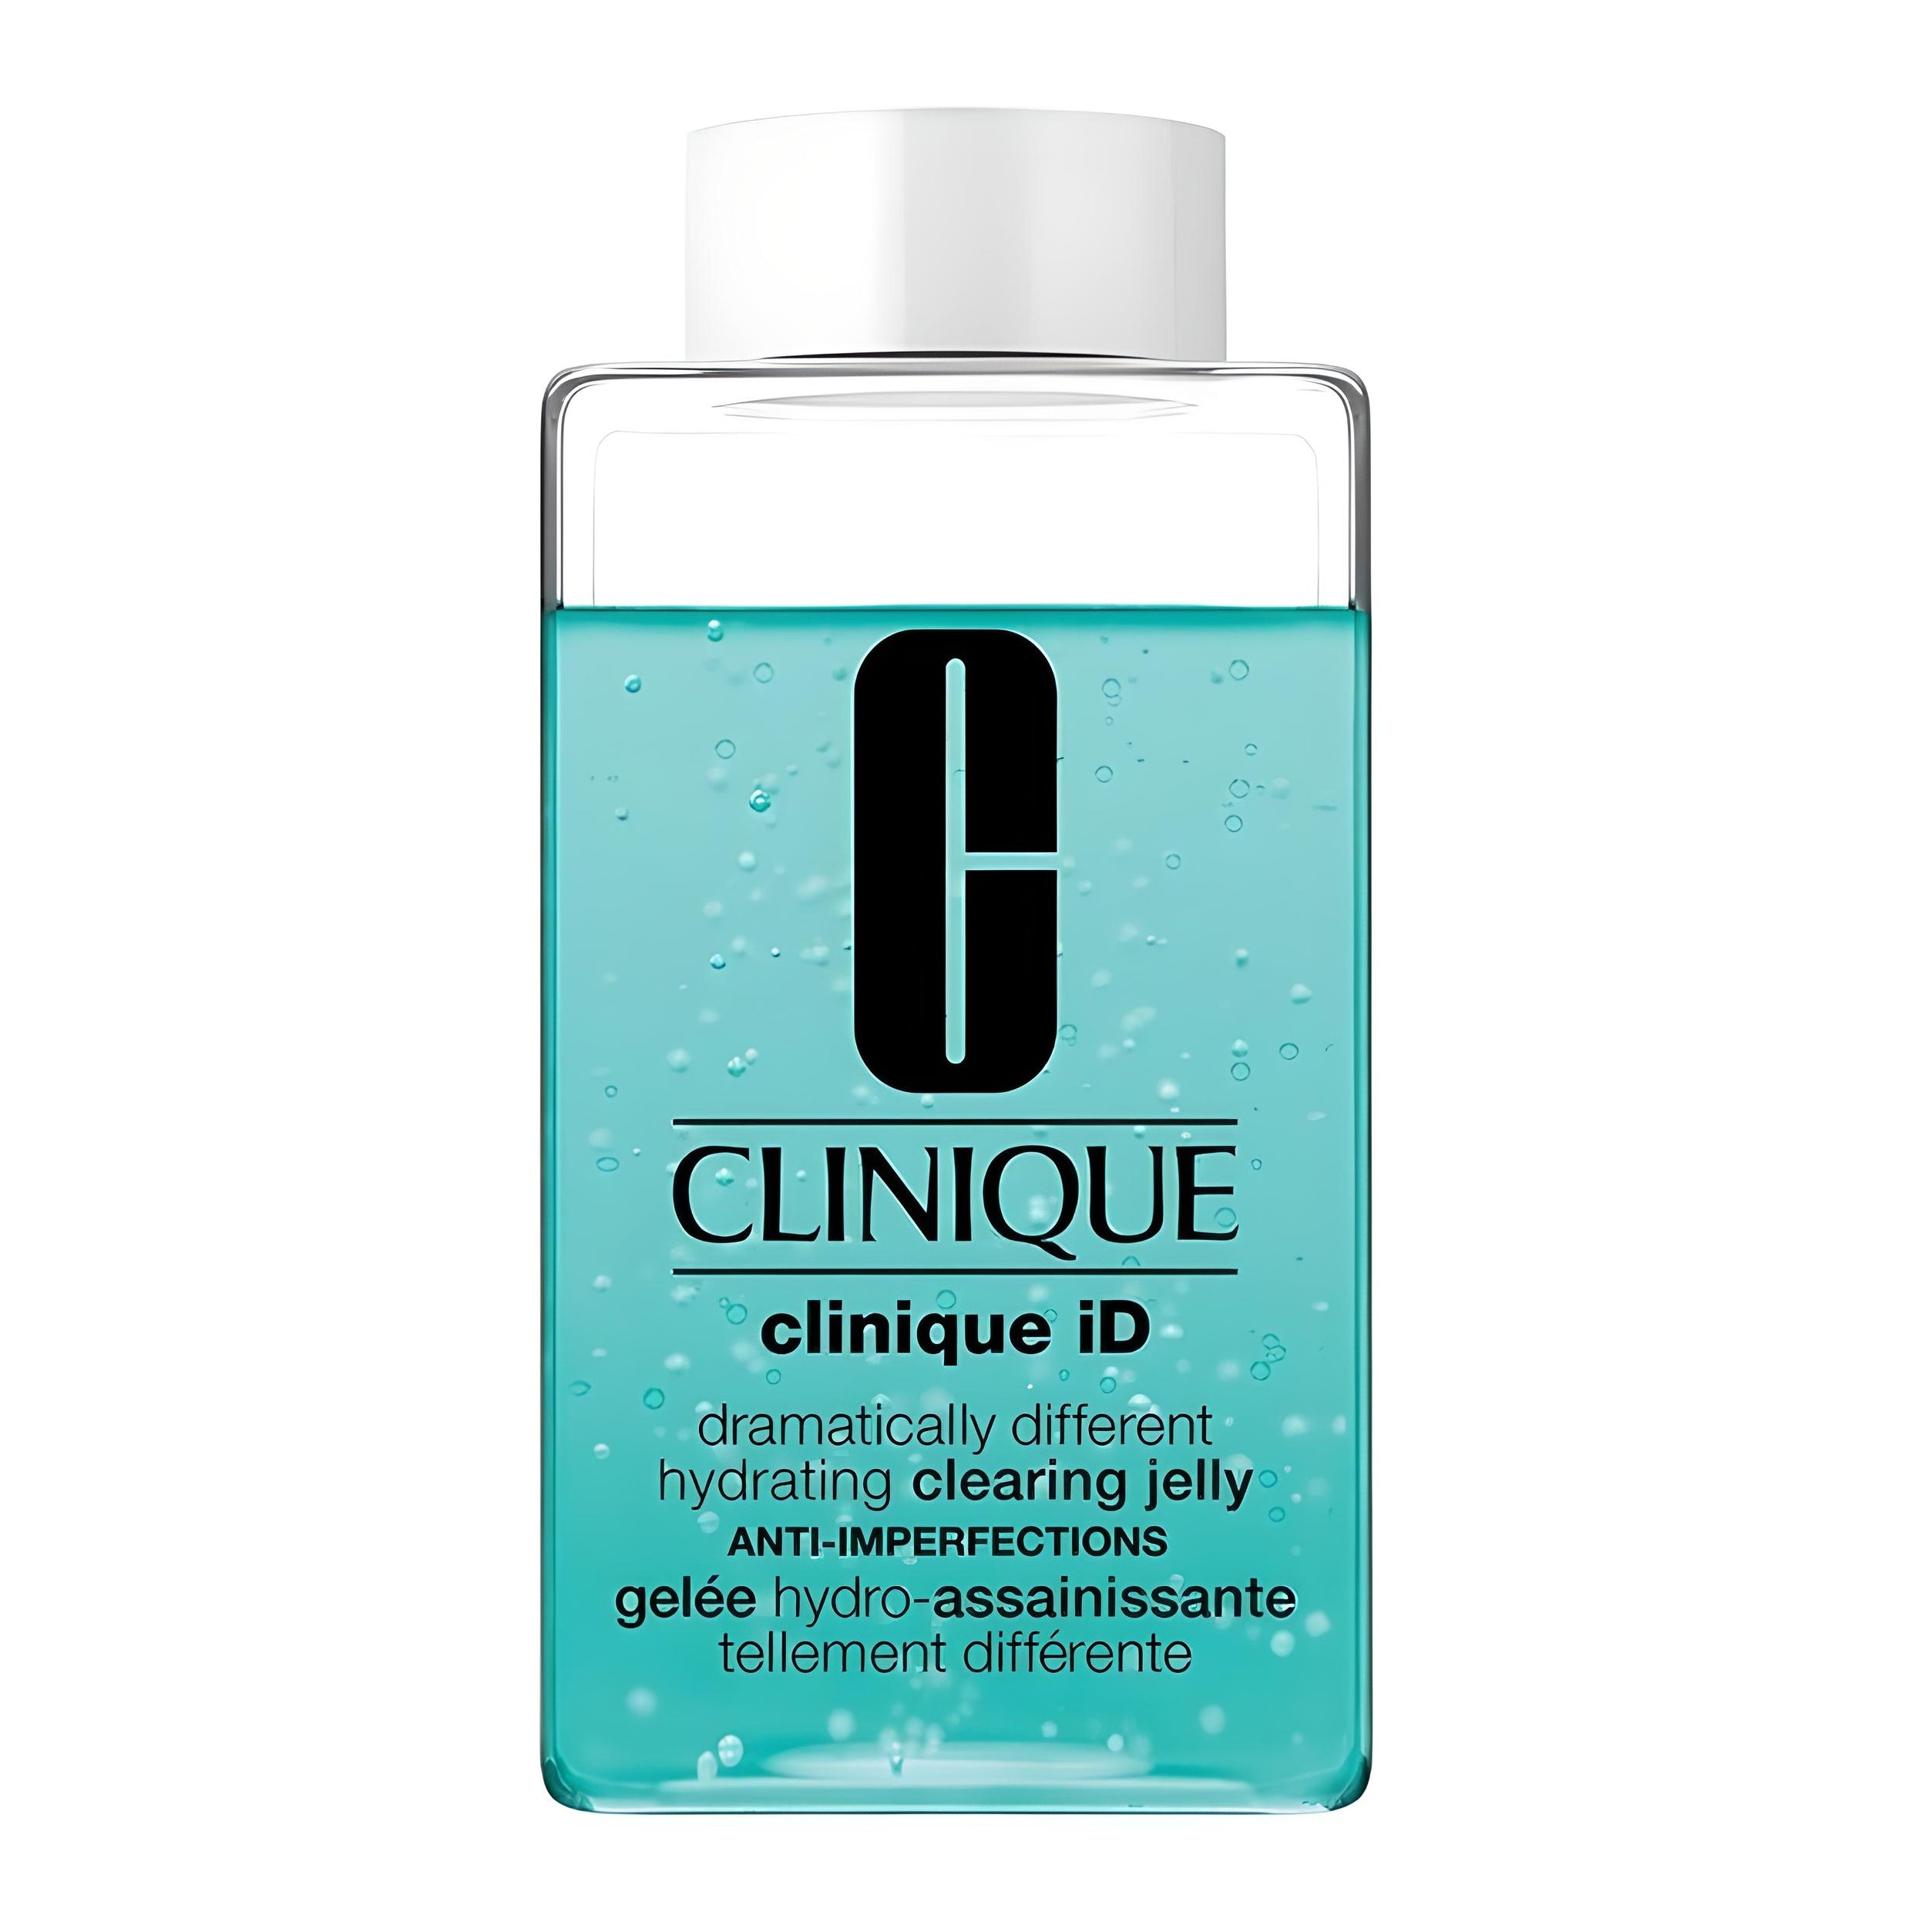 CLINIQUE ID dramatically different anti-imperfections